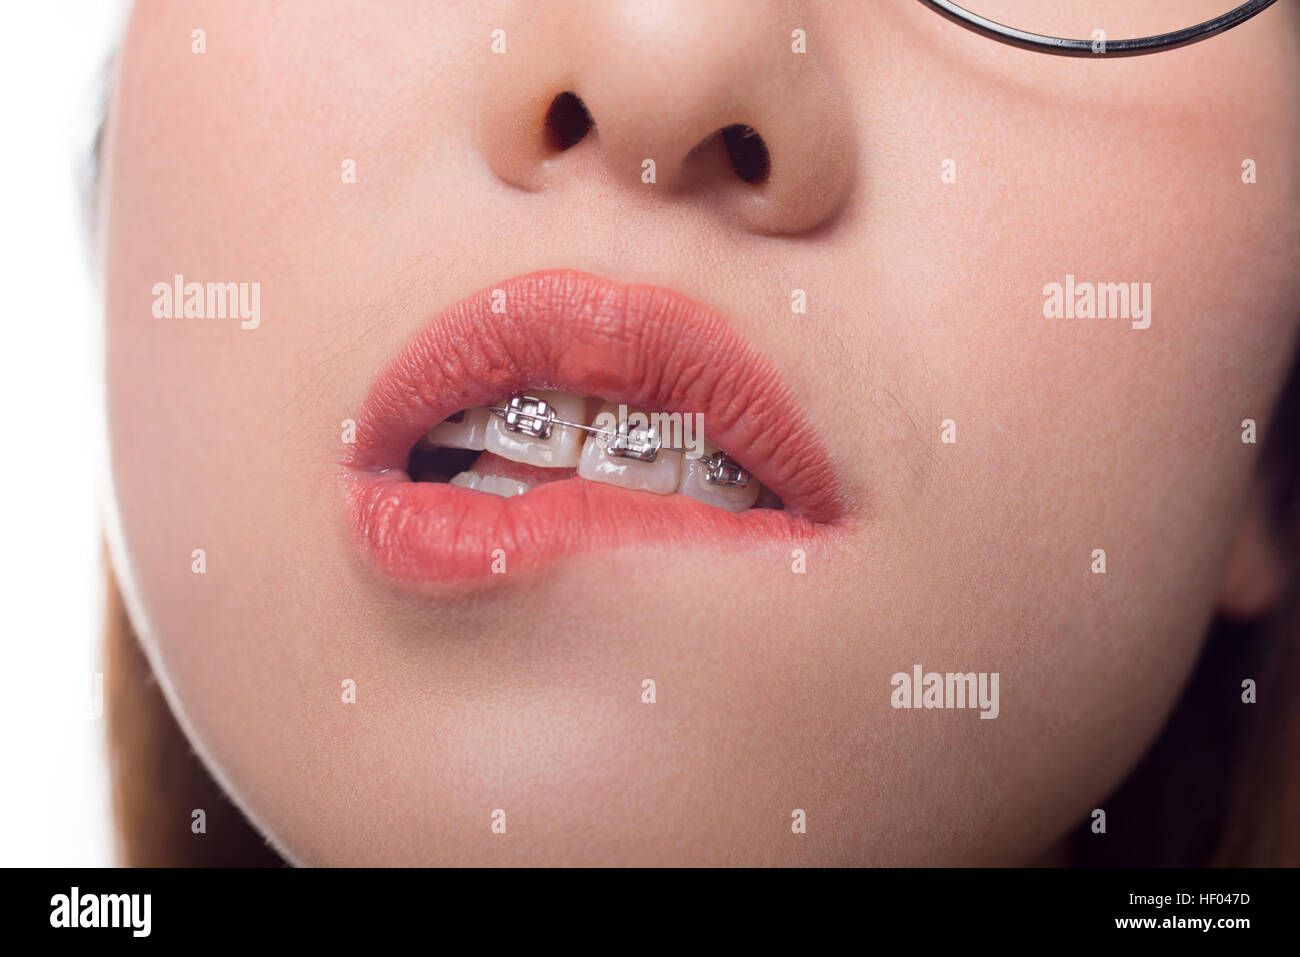 Beautiful young woman with brackets on teeth close up Stock Photo